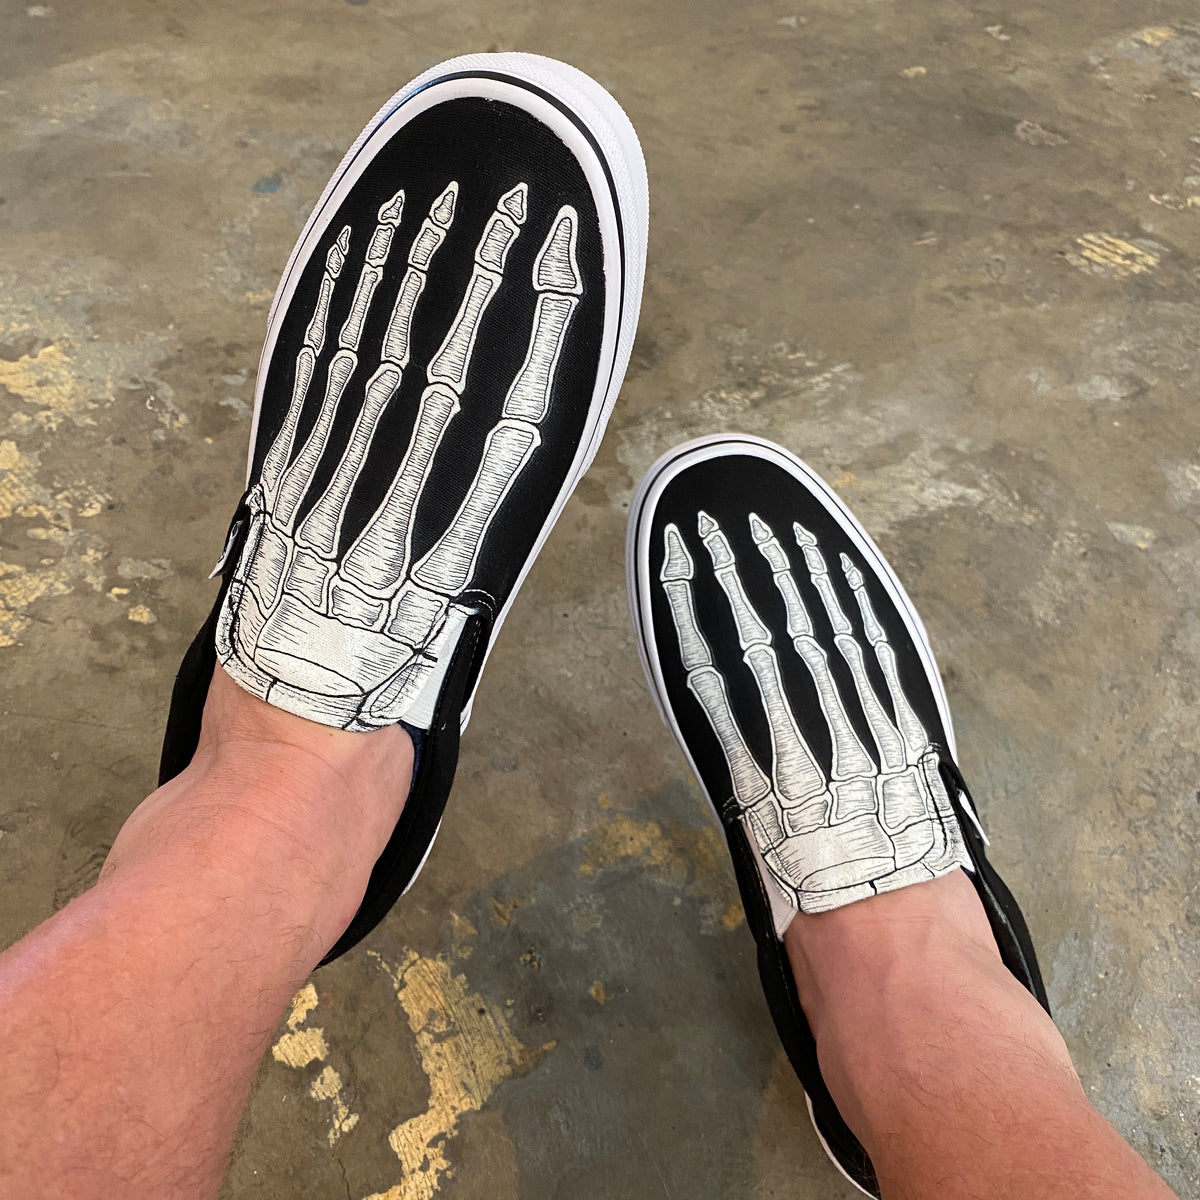 shoes with skeleton feet